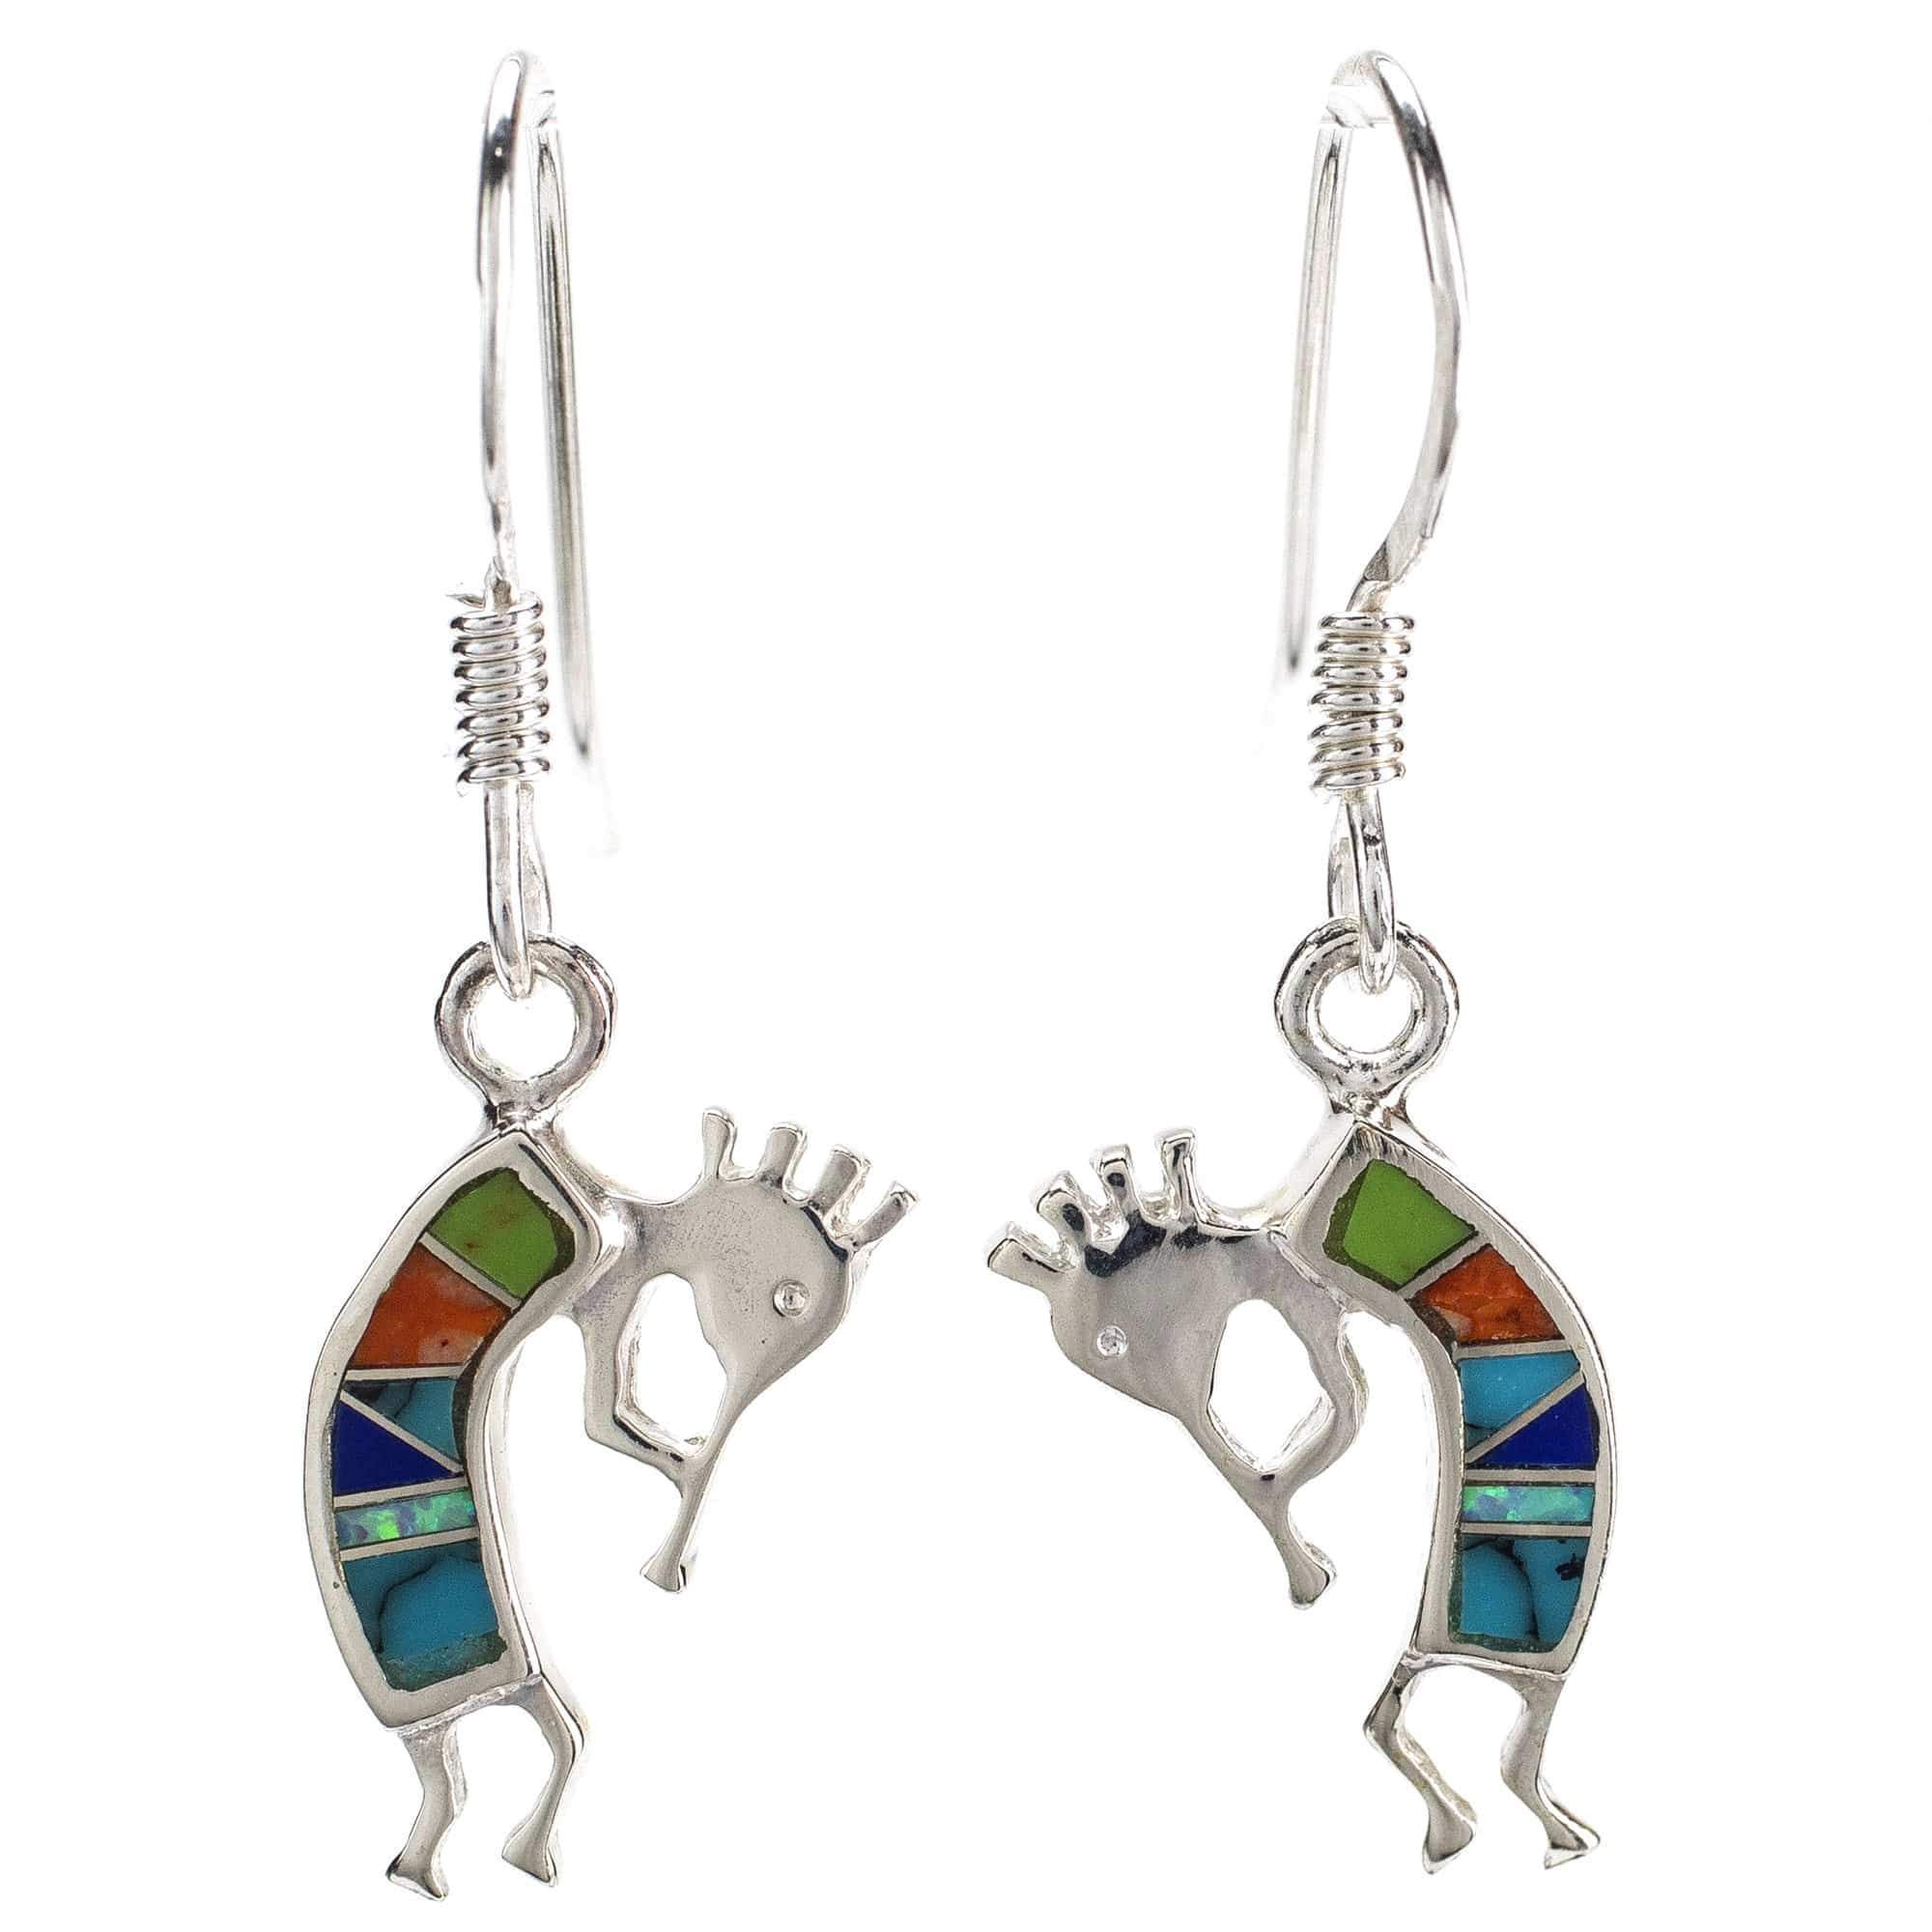 Kalifano Southwest Silver Jewelry Multi Gemstone Small Kokopelli 925 Sterling Silver Earring with French Hook USA Handmade with Aqua Opal Accent NME.0607.MT